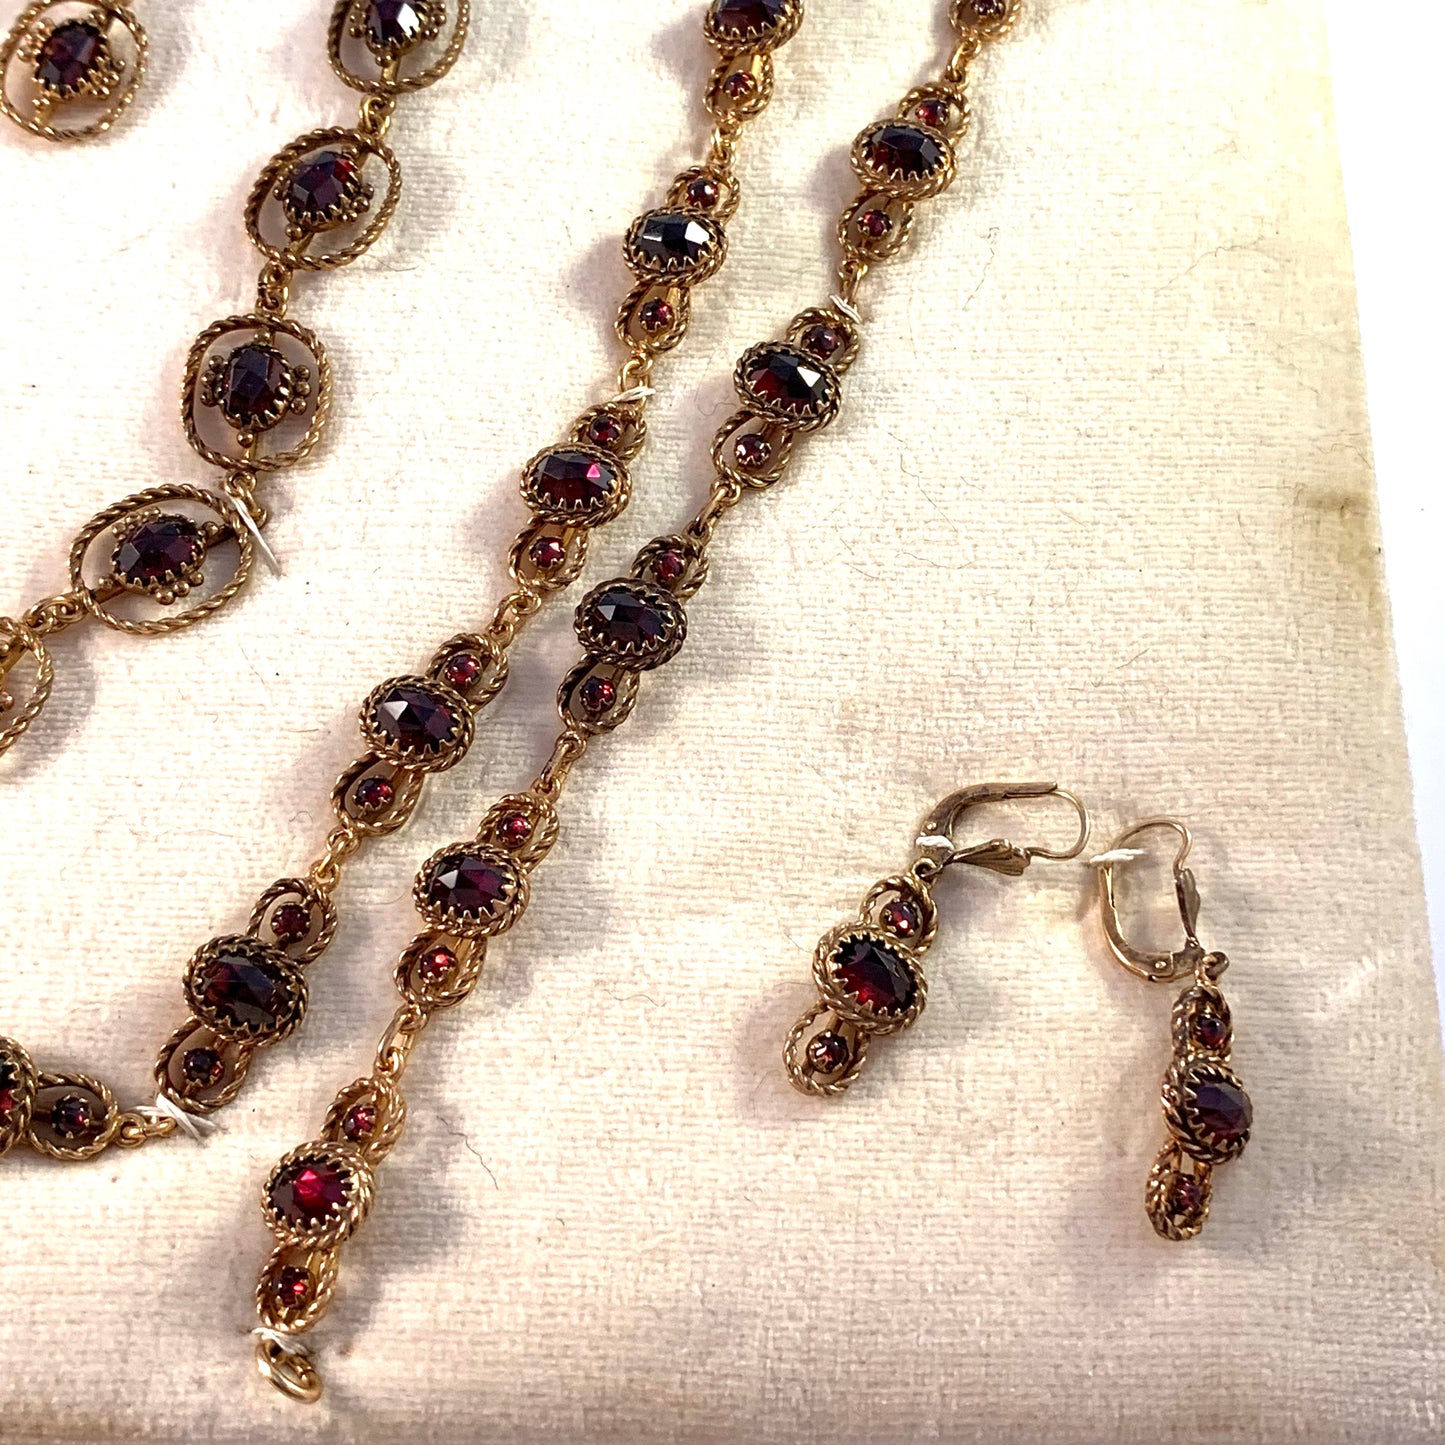 Extremely Rare Mid 1900s Full Display of Bohemian Garnet Jewelry.